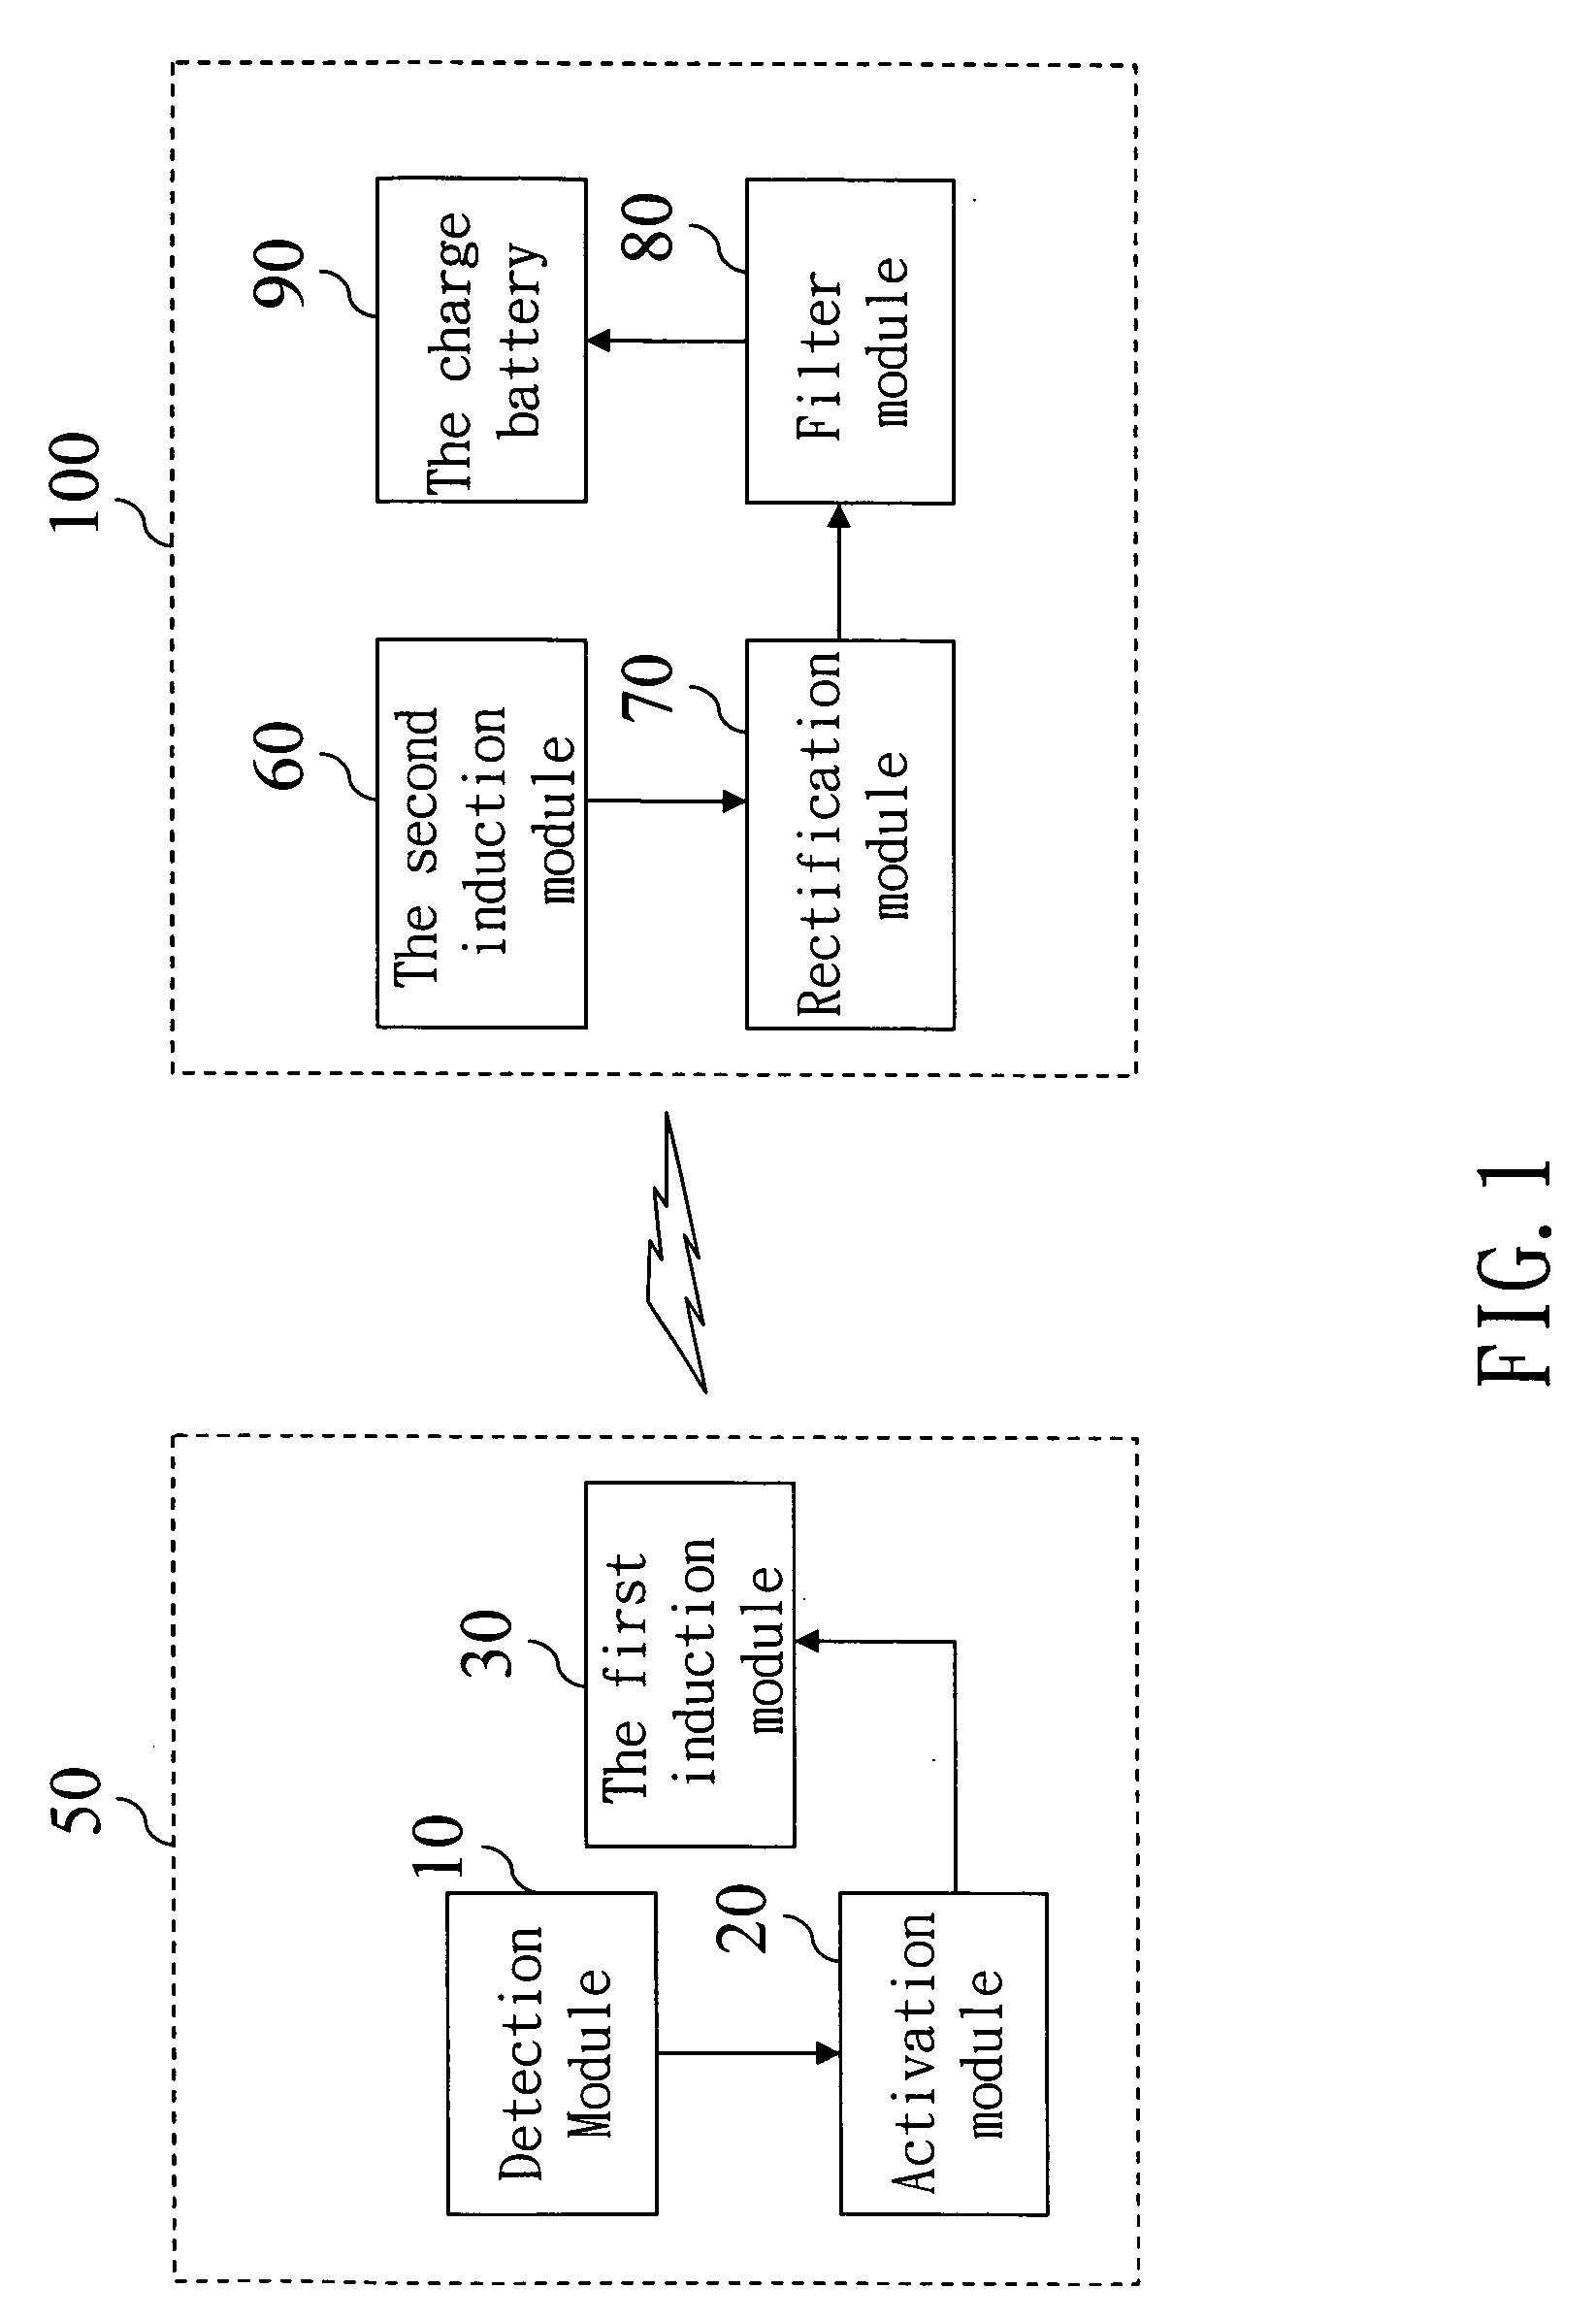 Integrated induction battery charge apparatus